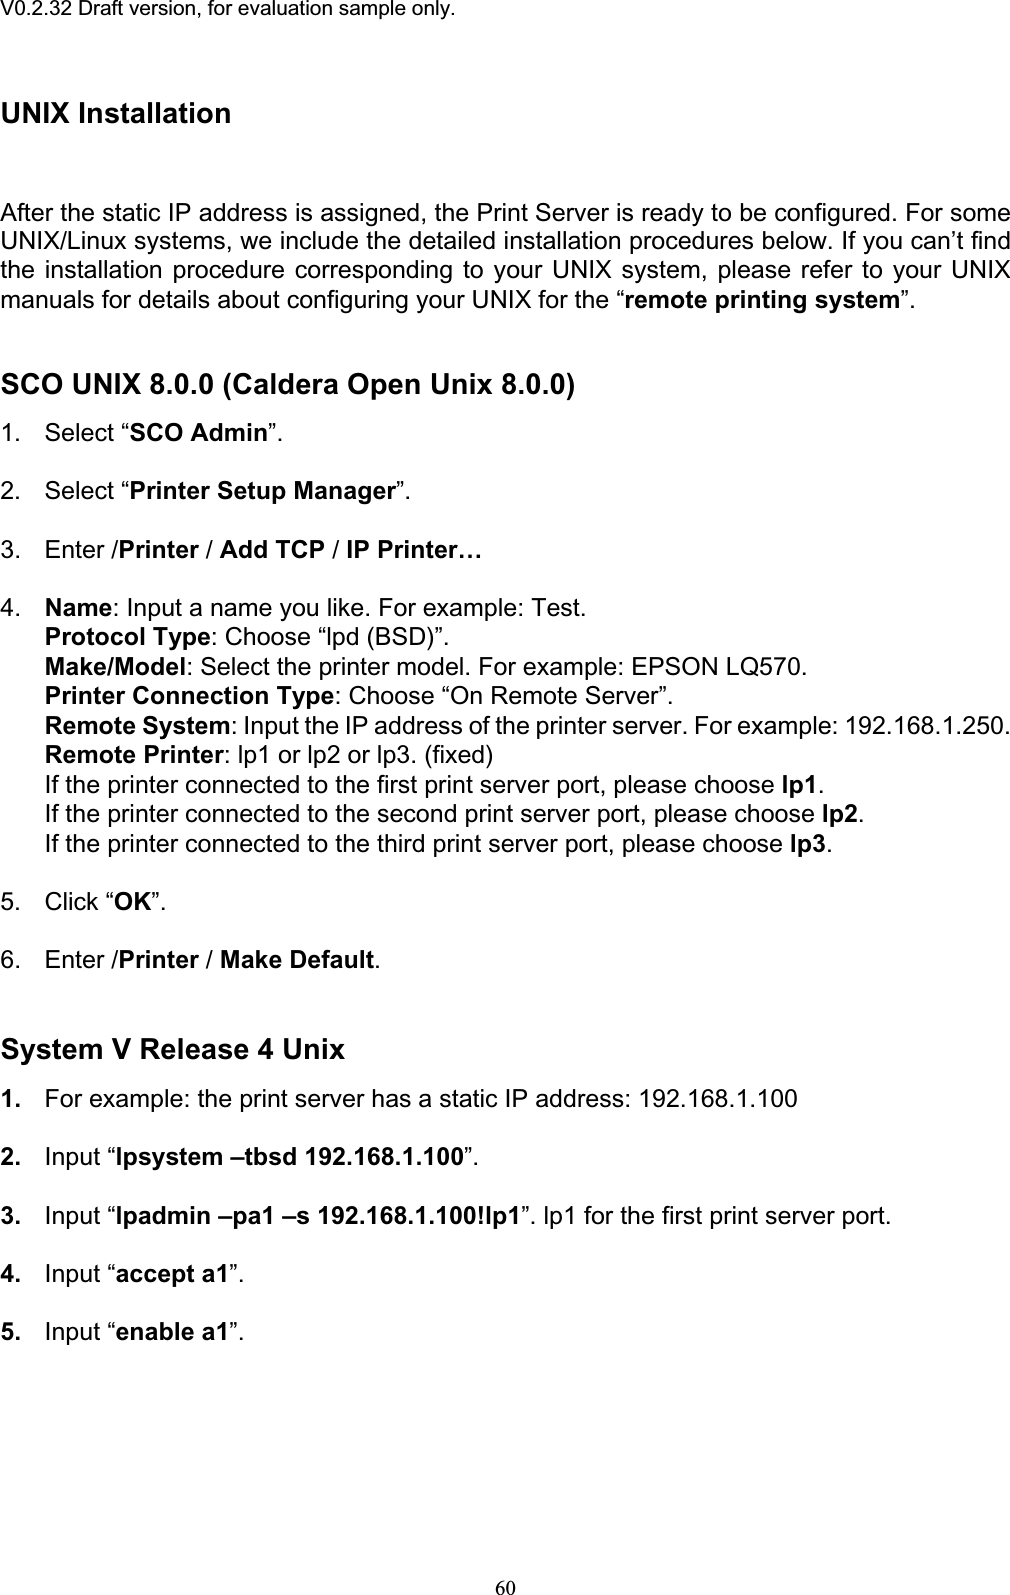 V0.2.32 Draft version, for evaluation sample only.UNIX Installation After the static IP address is assigned, the Print Server is ready to be configured. For some UNIX/Linux systems, we include the detailed installation procedures below. If you can’t find the installation procedure corresponding to your UNIX system, please refer to your UNIX manuals for details about configuring your UNIX for the “remote printing system”.SCO UNIX 8.0.0 (Caldera Open Unix 8.0.0) 1. Select “SCO Admin”.2. Select “Printer Setup Manager”.3. Enter /Printer / Add TCP / IP Printer…4. Name: Input a name you like. For example: Test. Protocol Type: Choose “lpd (BSD)”. Make/Model: Select the printer model. For example: EPSON LQ570. Printer Connection Type: Choose “On Remote Server”. Remote System: Input the IP address of the printer server. For example: 192.168.1.250. Remote Printer: lp1 or lp2 or lp3. (fixed) If the printer connected to the first print server port, please choose lp1.If the printer connected to the second print server port, please choose lp2.If the printer connected to the third print server port, please choose lp3.5. Click “OK”.6. Enter /Printer / Make Default.System V Release 4 Unix 1. For example: the print server has a static IP address: 192.168.1.100 2. Input “lpsystem –tbsd 192.168.1.100”.3. Input “lpadmin –pa1 –s 192.168.1.100!lp1”. lp1 for the first print server port. 4. Input “accept a1”.5. Input “enable a1”.60